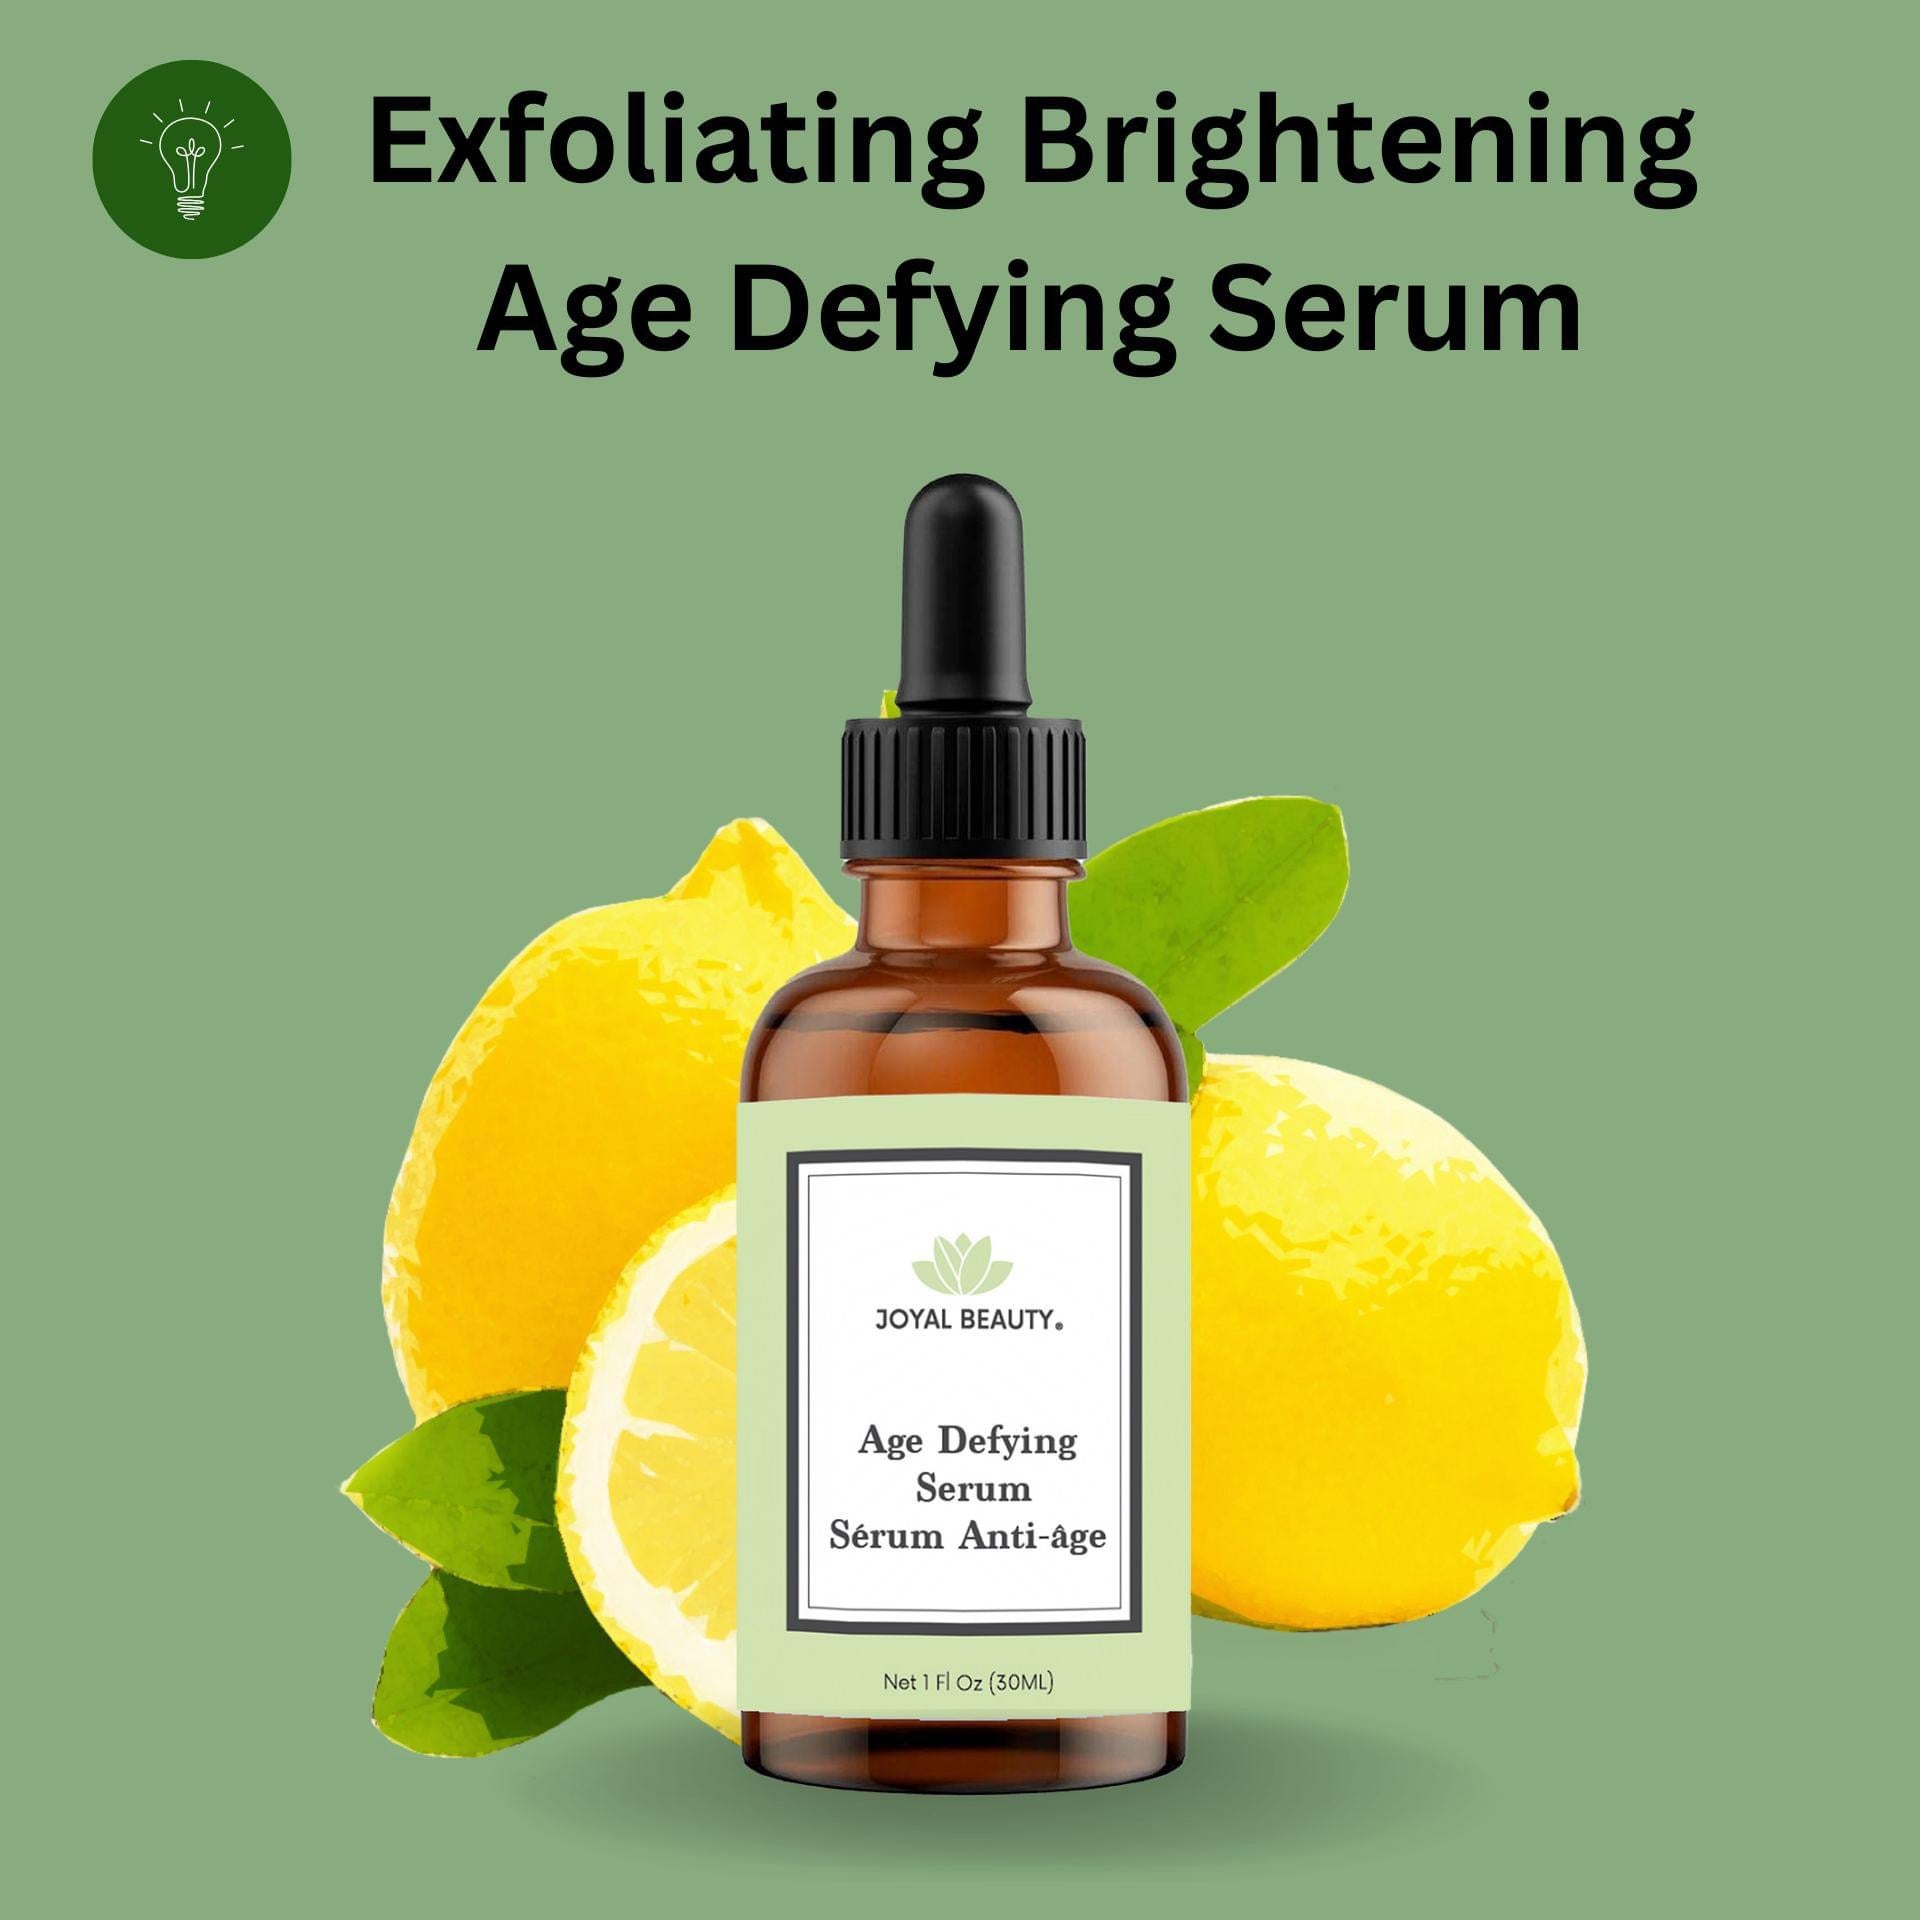 Regular gentle exfoliation is essential for maintaining healthy and vibrant skin